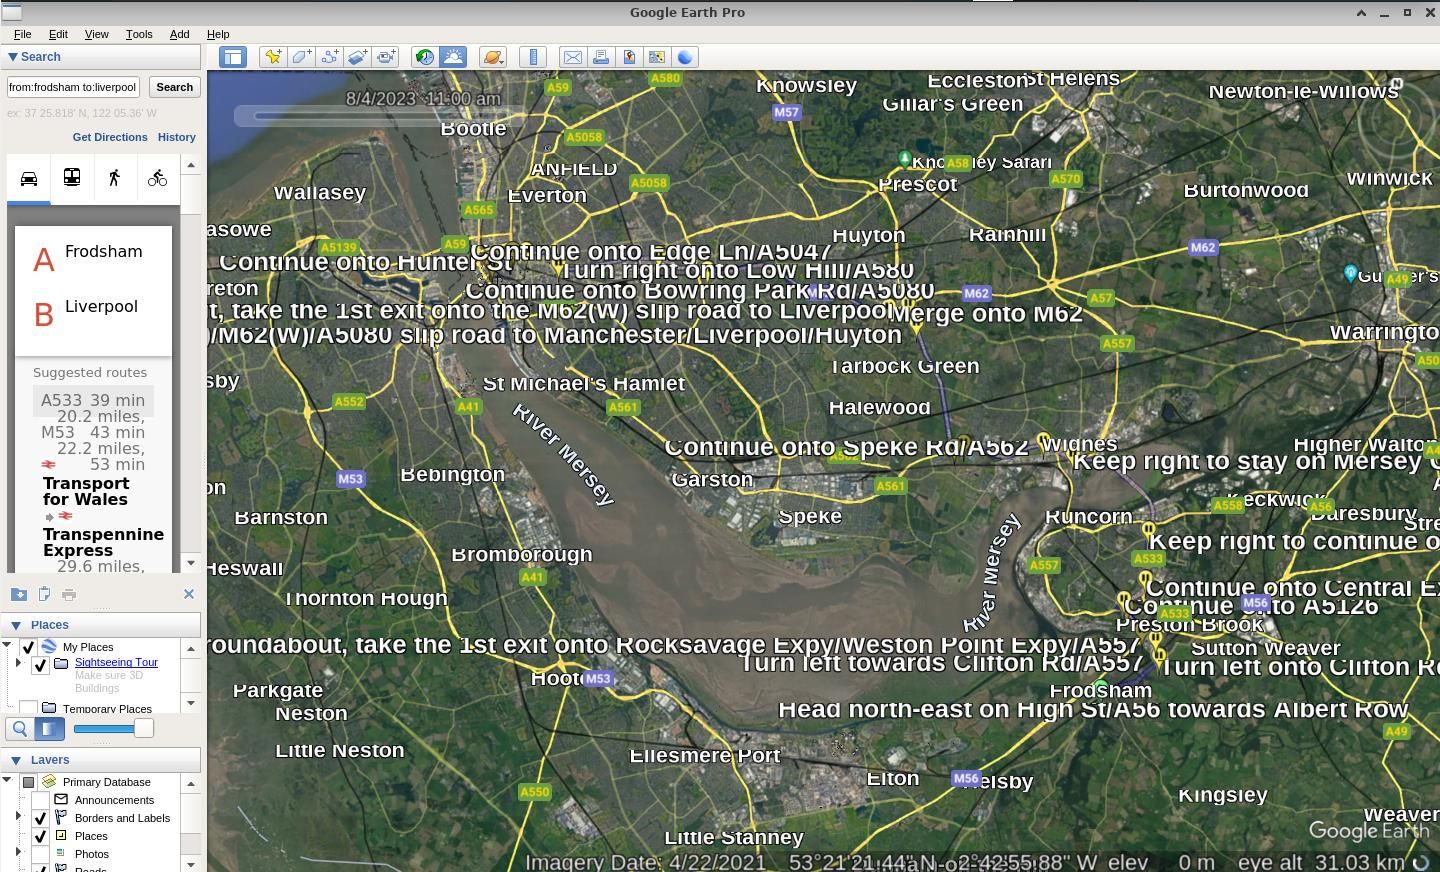 route planning with google earth on linux is clunky and cluttered